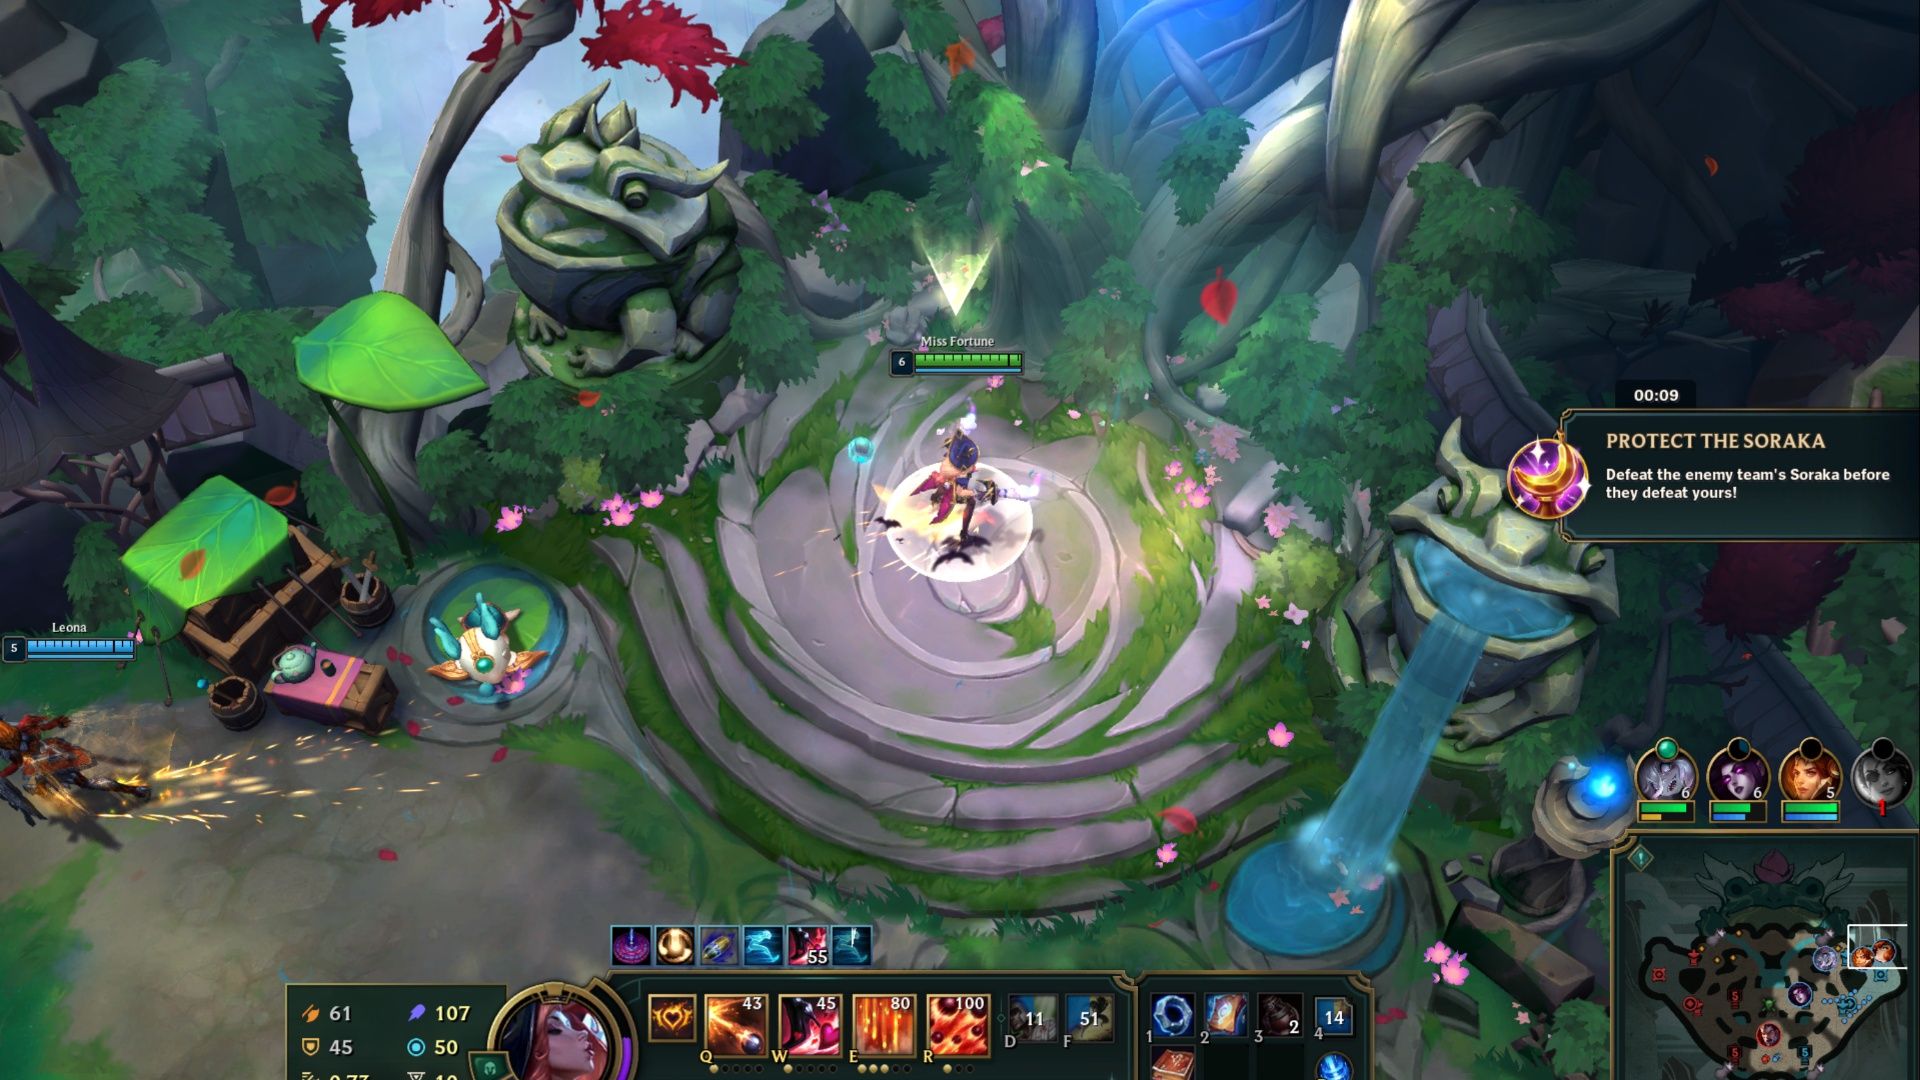 Miss Fortune standing in the fountain on the Nexus Blitz map in League of Legends.